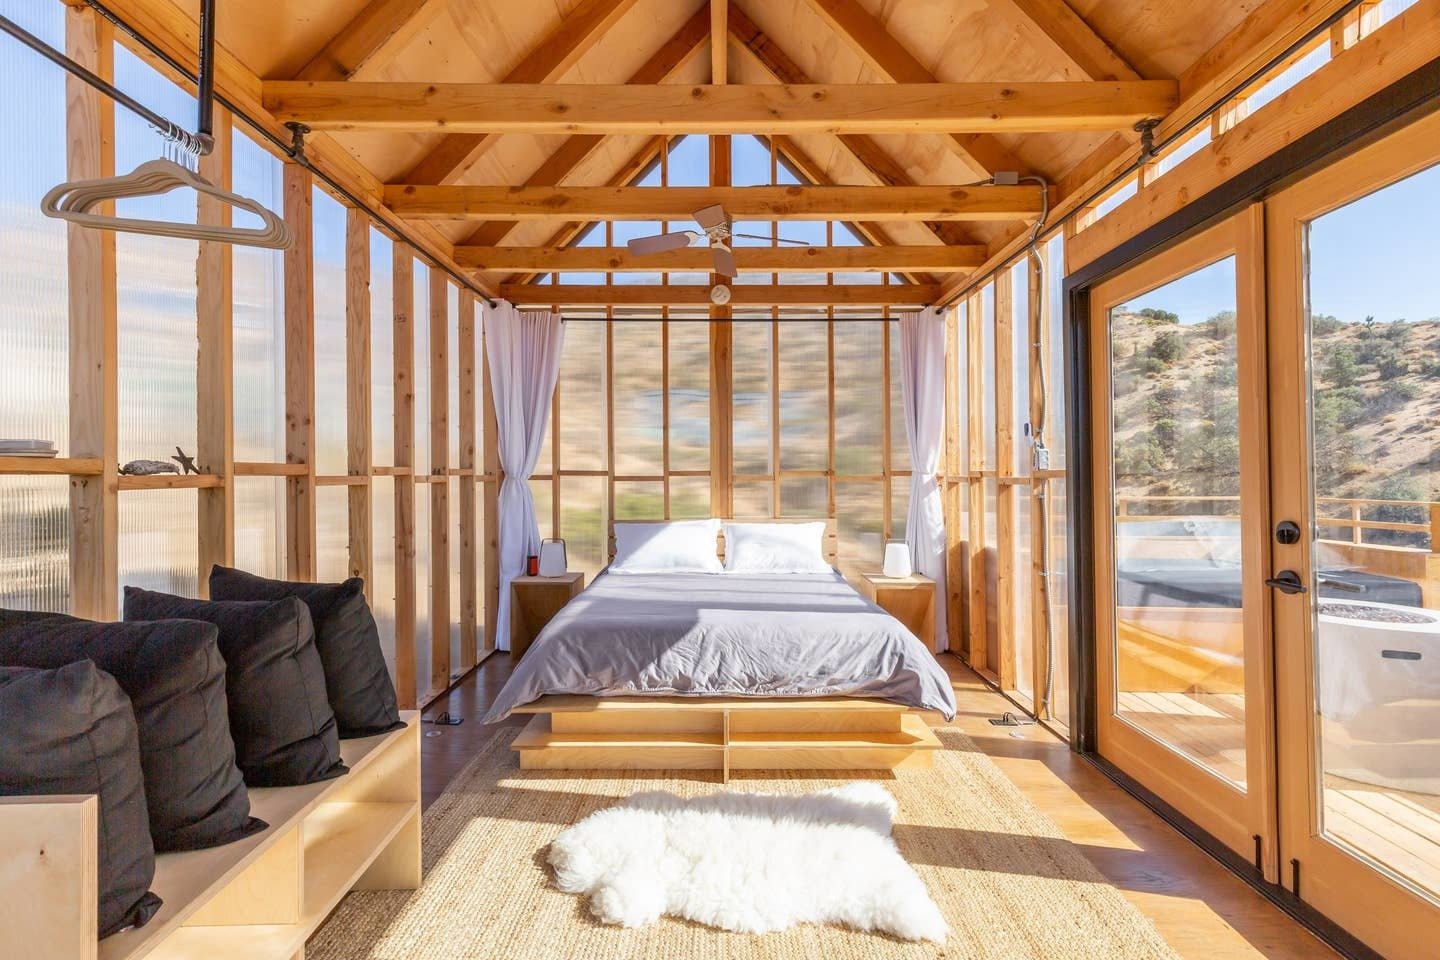 Take in Panoramic Desert Views in This Off-Grid Cabin